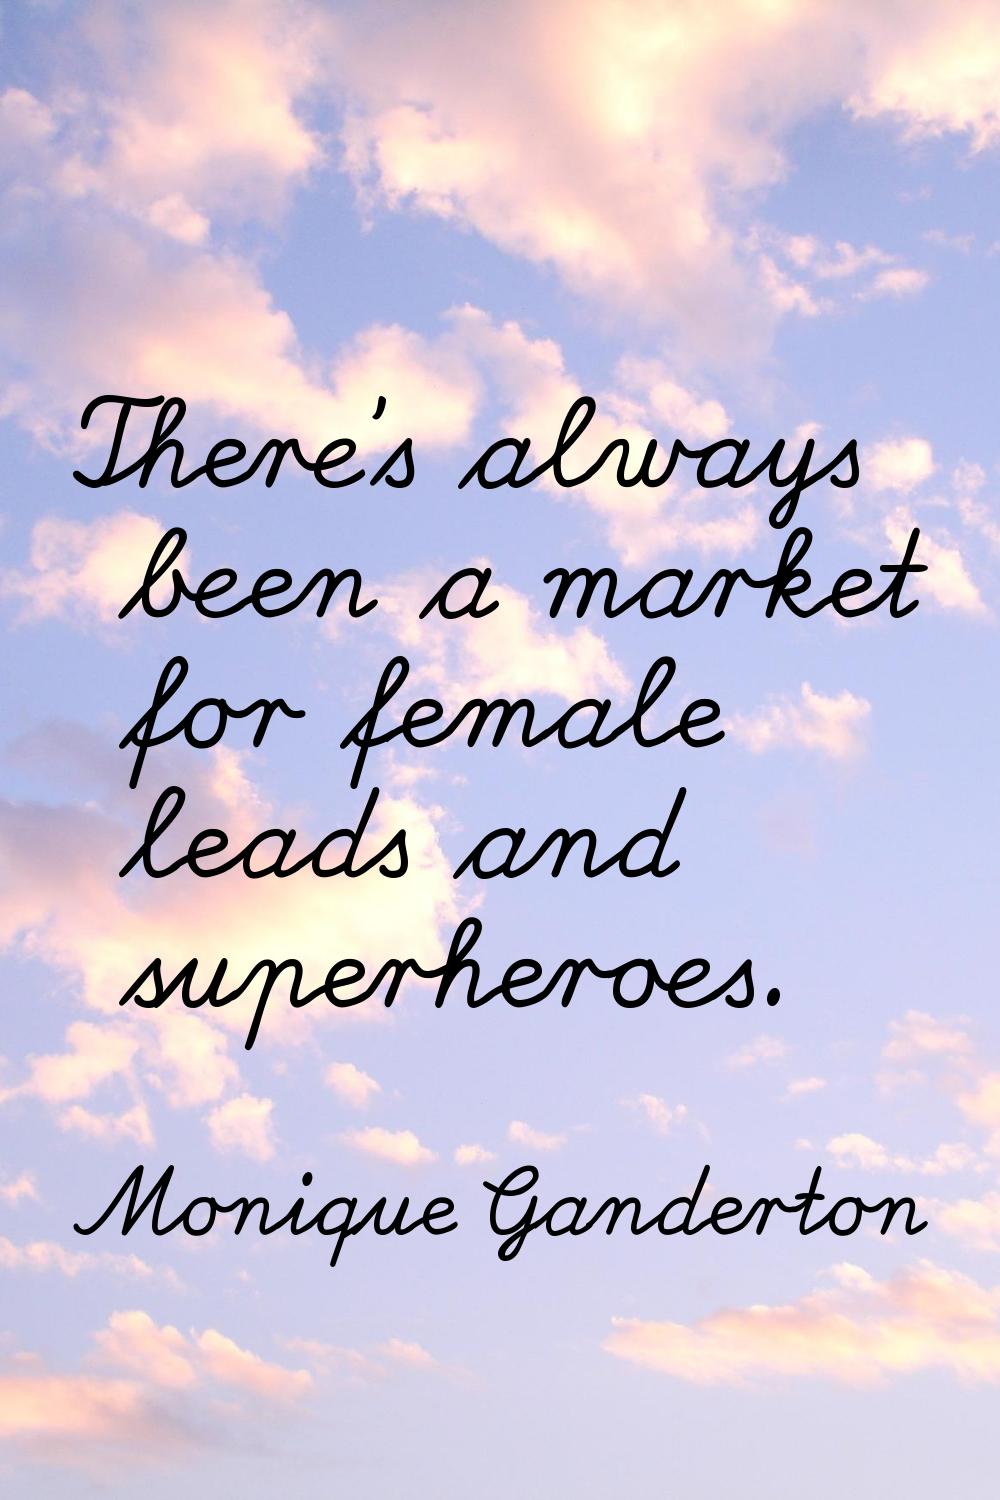 There's always been a market for female leads and superheroes.